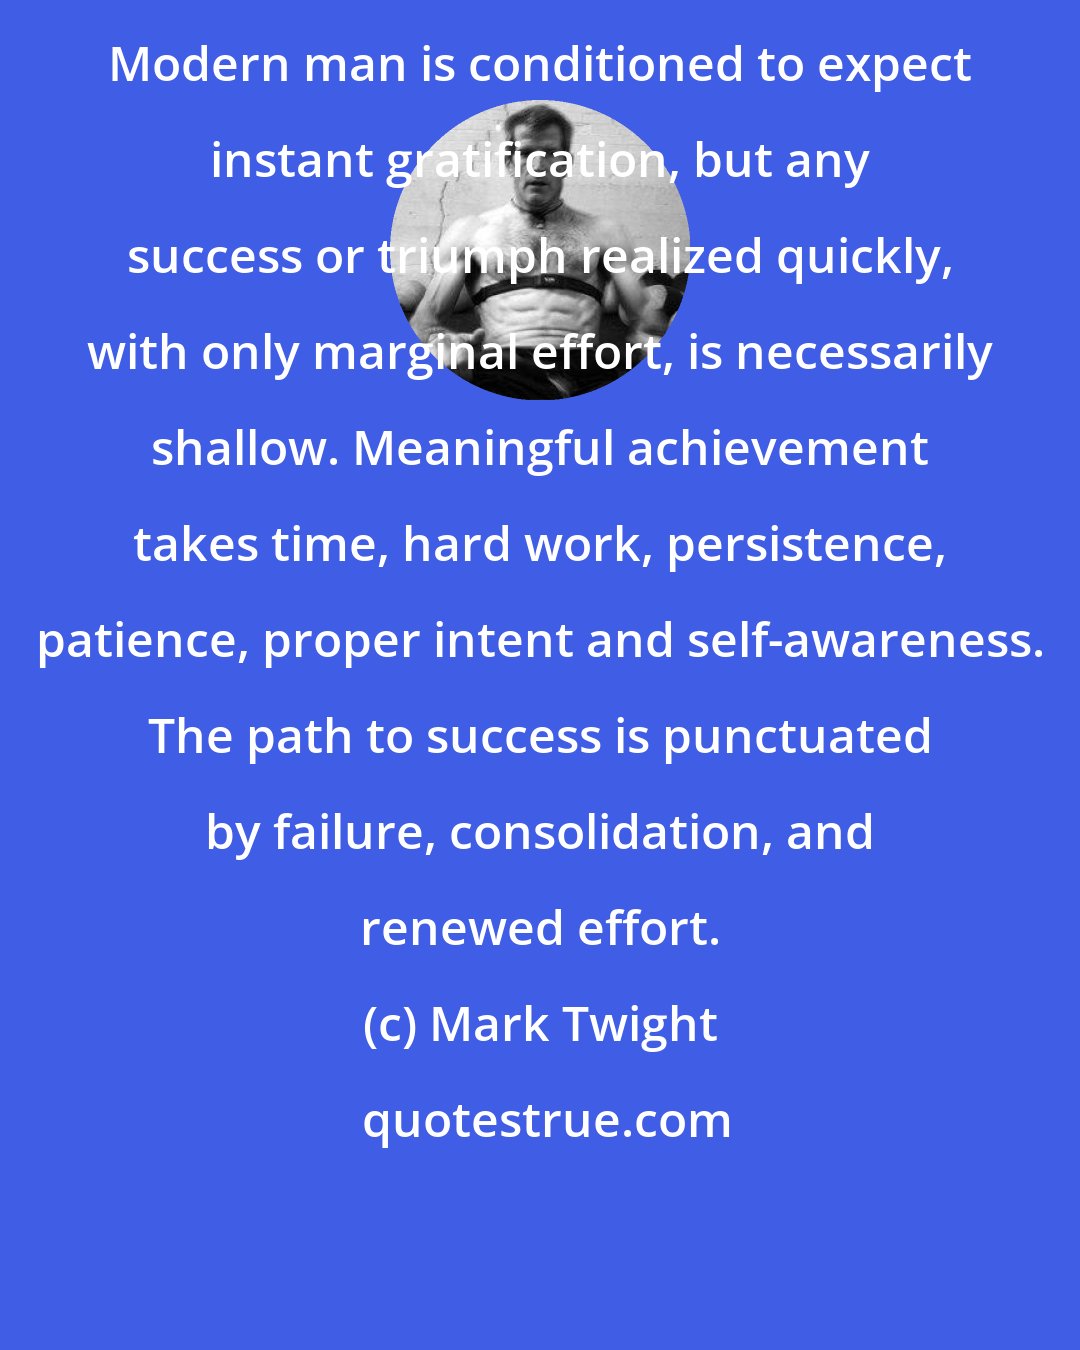 Mark Twight: Modern man is conditioned to expect instant gratification, but any success or triumph realized quickly, with only marginal effort, is necessarily shallow. Meaningful achievement takes time, hard work, persistence, patience, proper intent and self-awareness. The path to success is punctuated by failure, consolidation, and renewed effort.